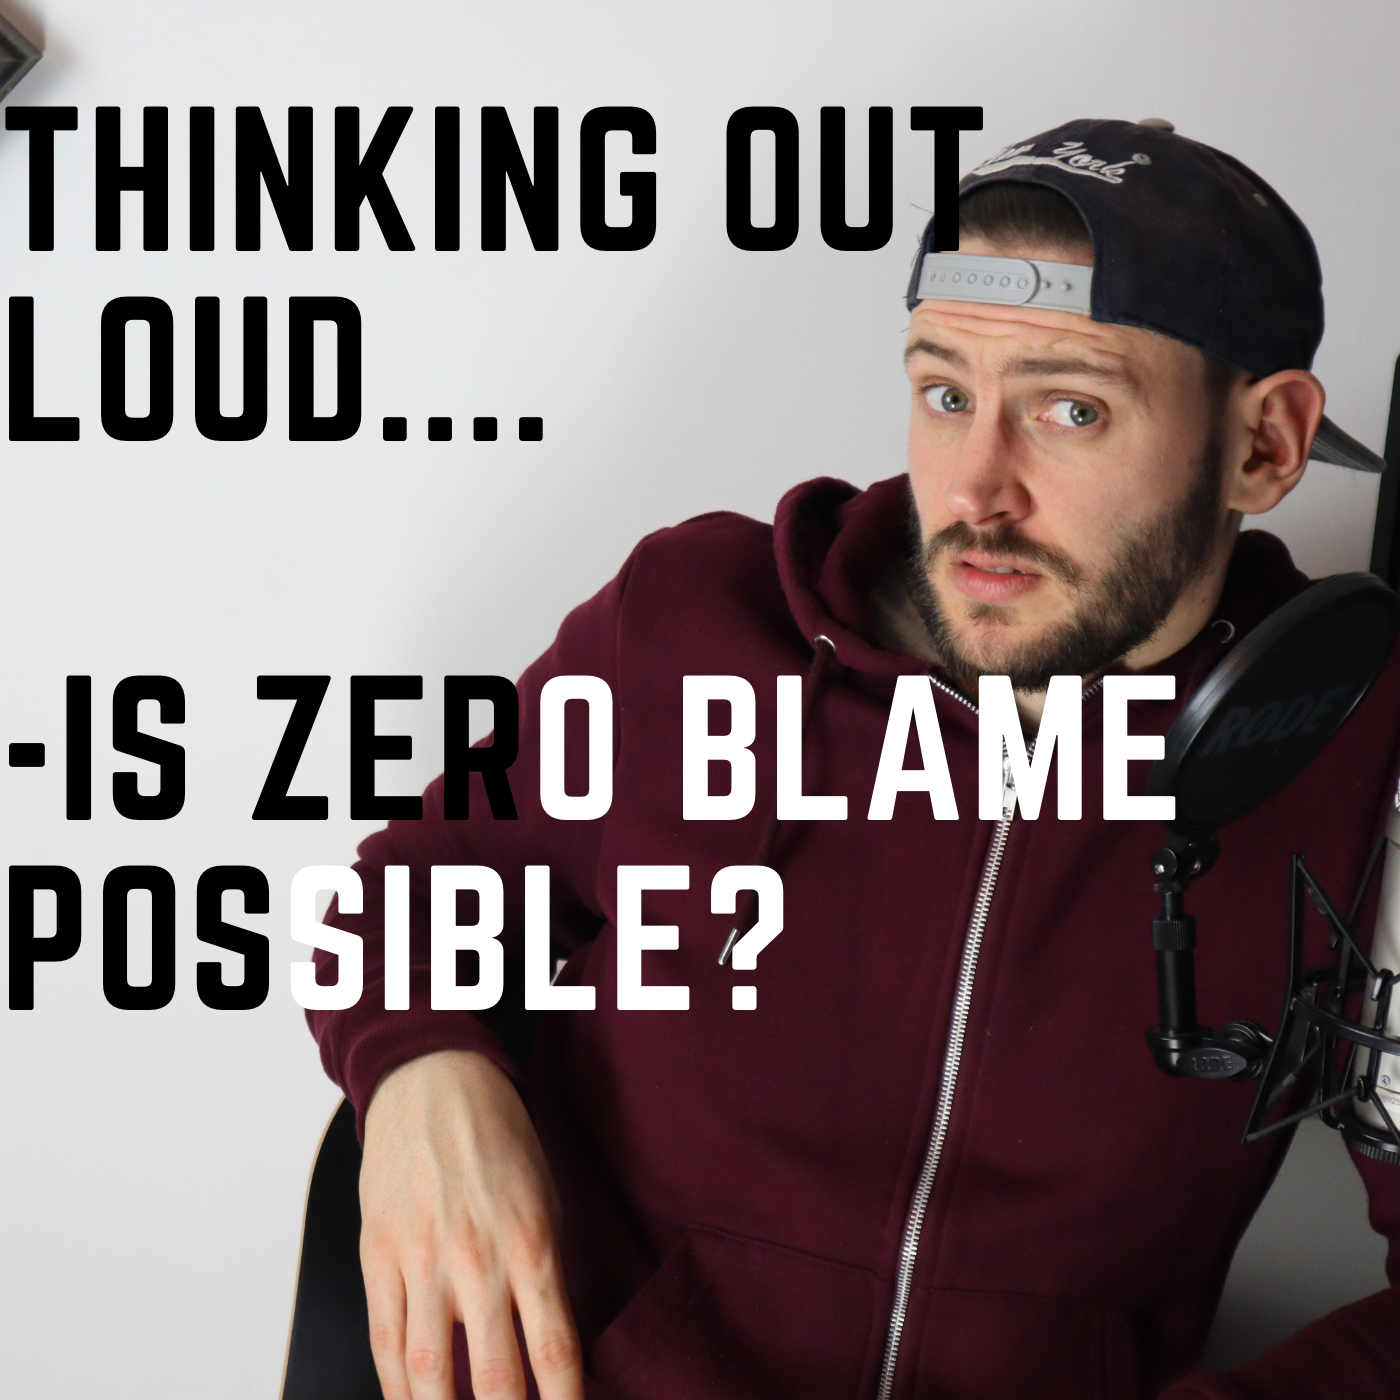 Is zero blame possible- A Thinking out loud episode